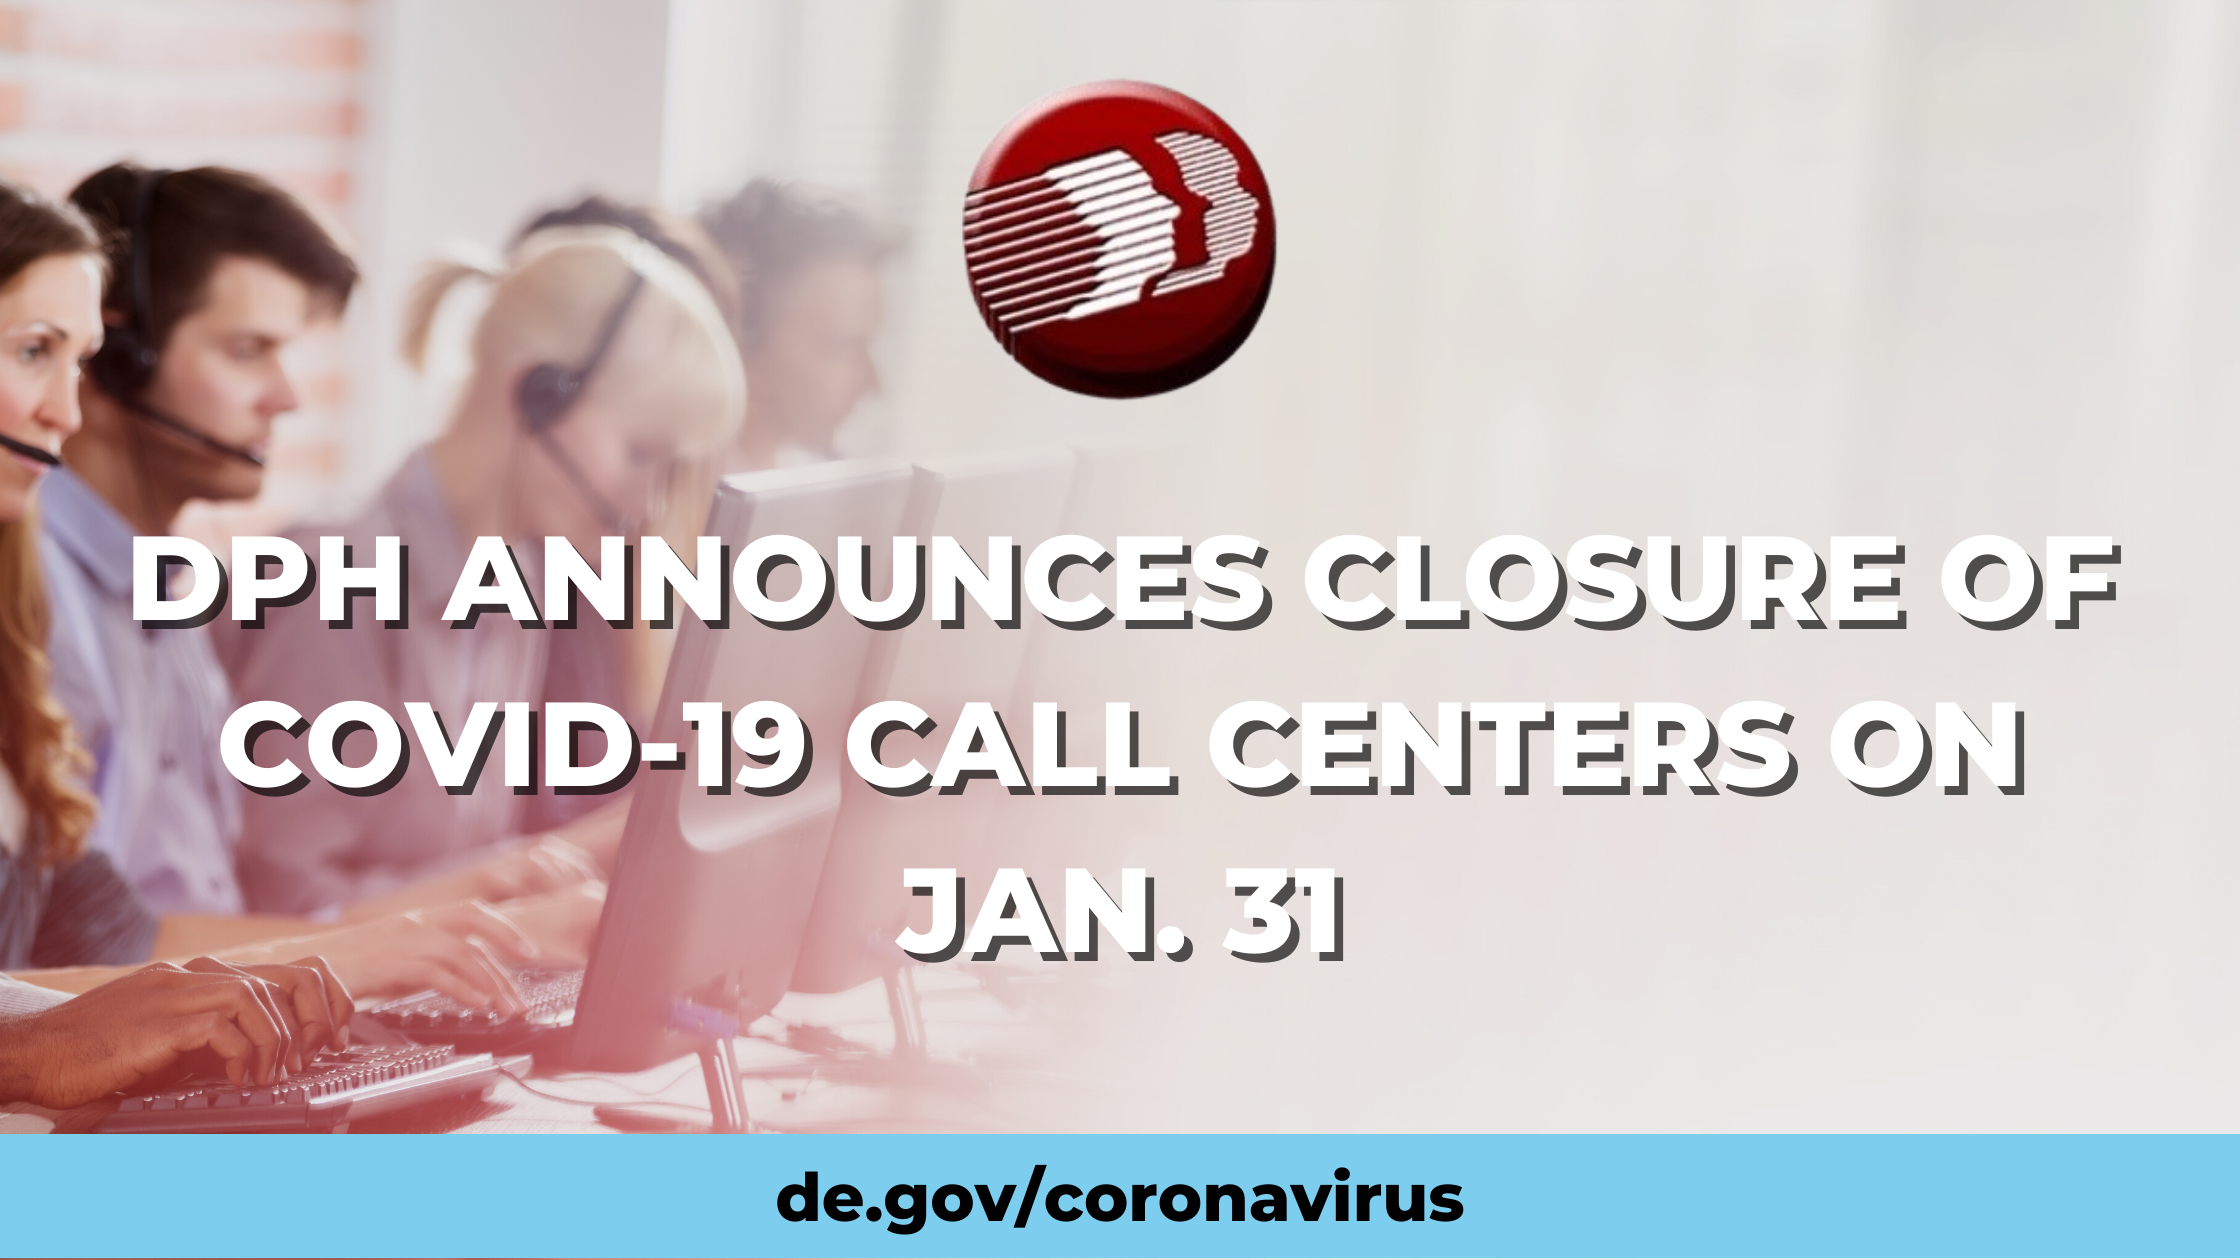 DPH Announces Closure Of COVID-19 Call Centers on Jan. 31